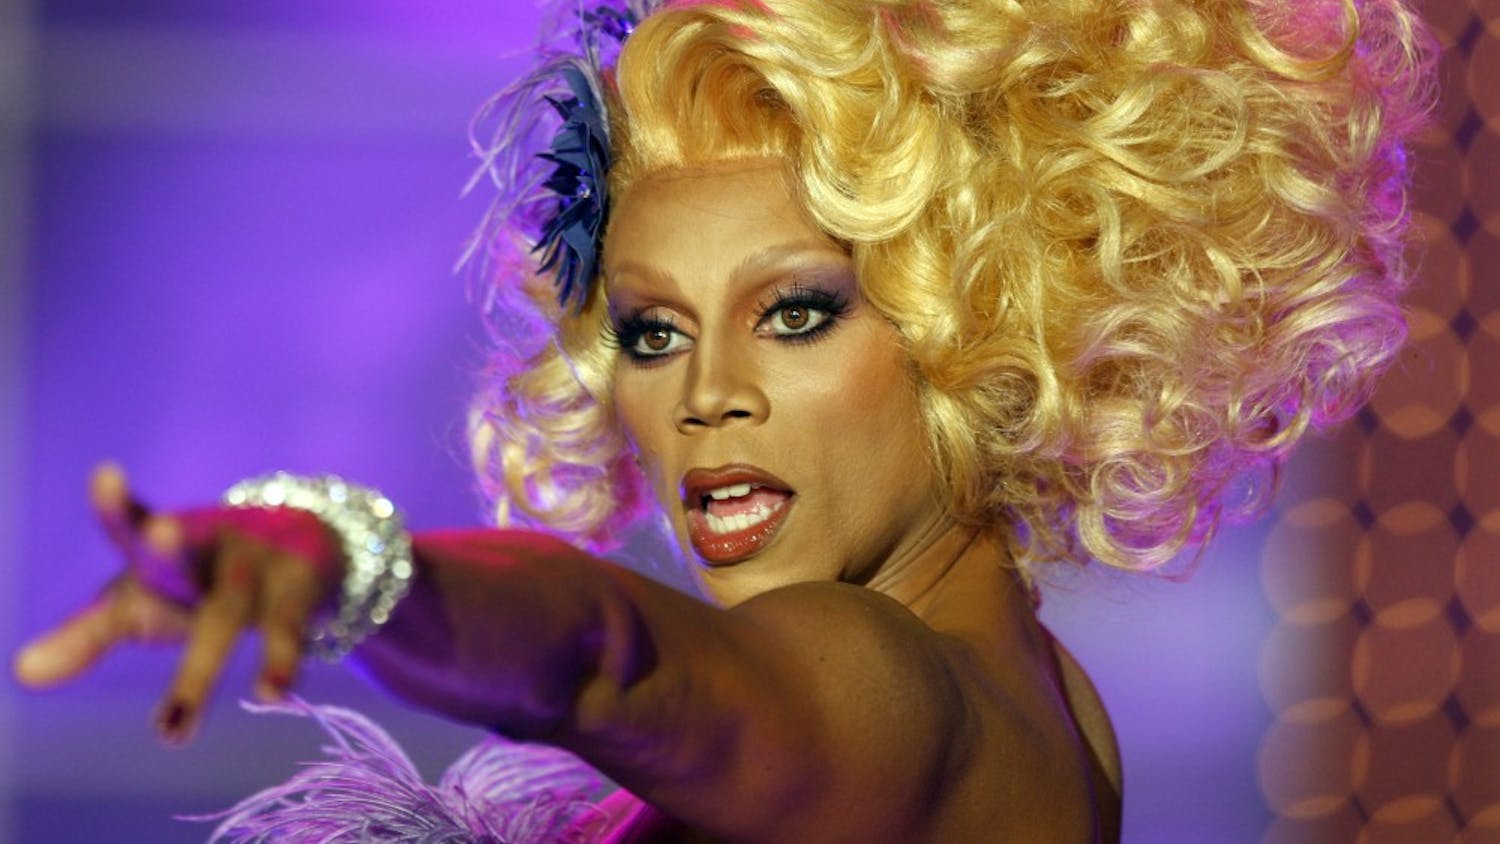 RuPaul walks the runway in his famous drag queen guise during a taping of "RuPaul's Drag Race" in 2009 in Culver City, California. "Drag Race," a show in which drag queens compete to be crowned America's Next Drag Superstar, will air "All Stars 3" in January 2018.